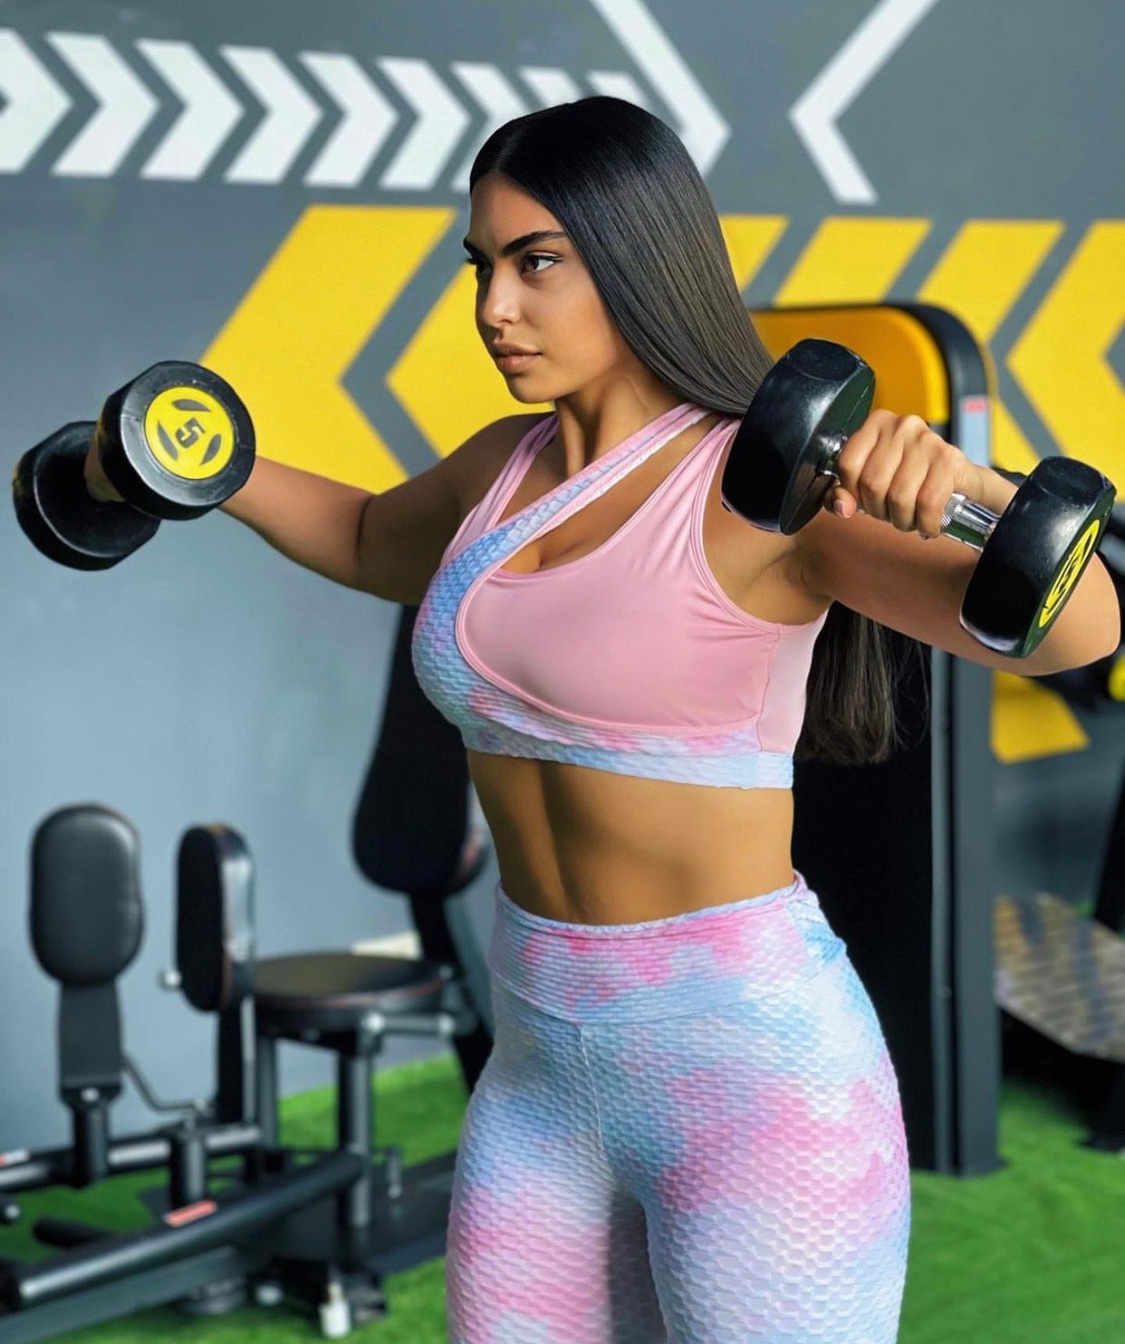 Gym membership `Lady Zone` for 1 year